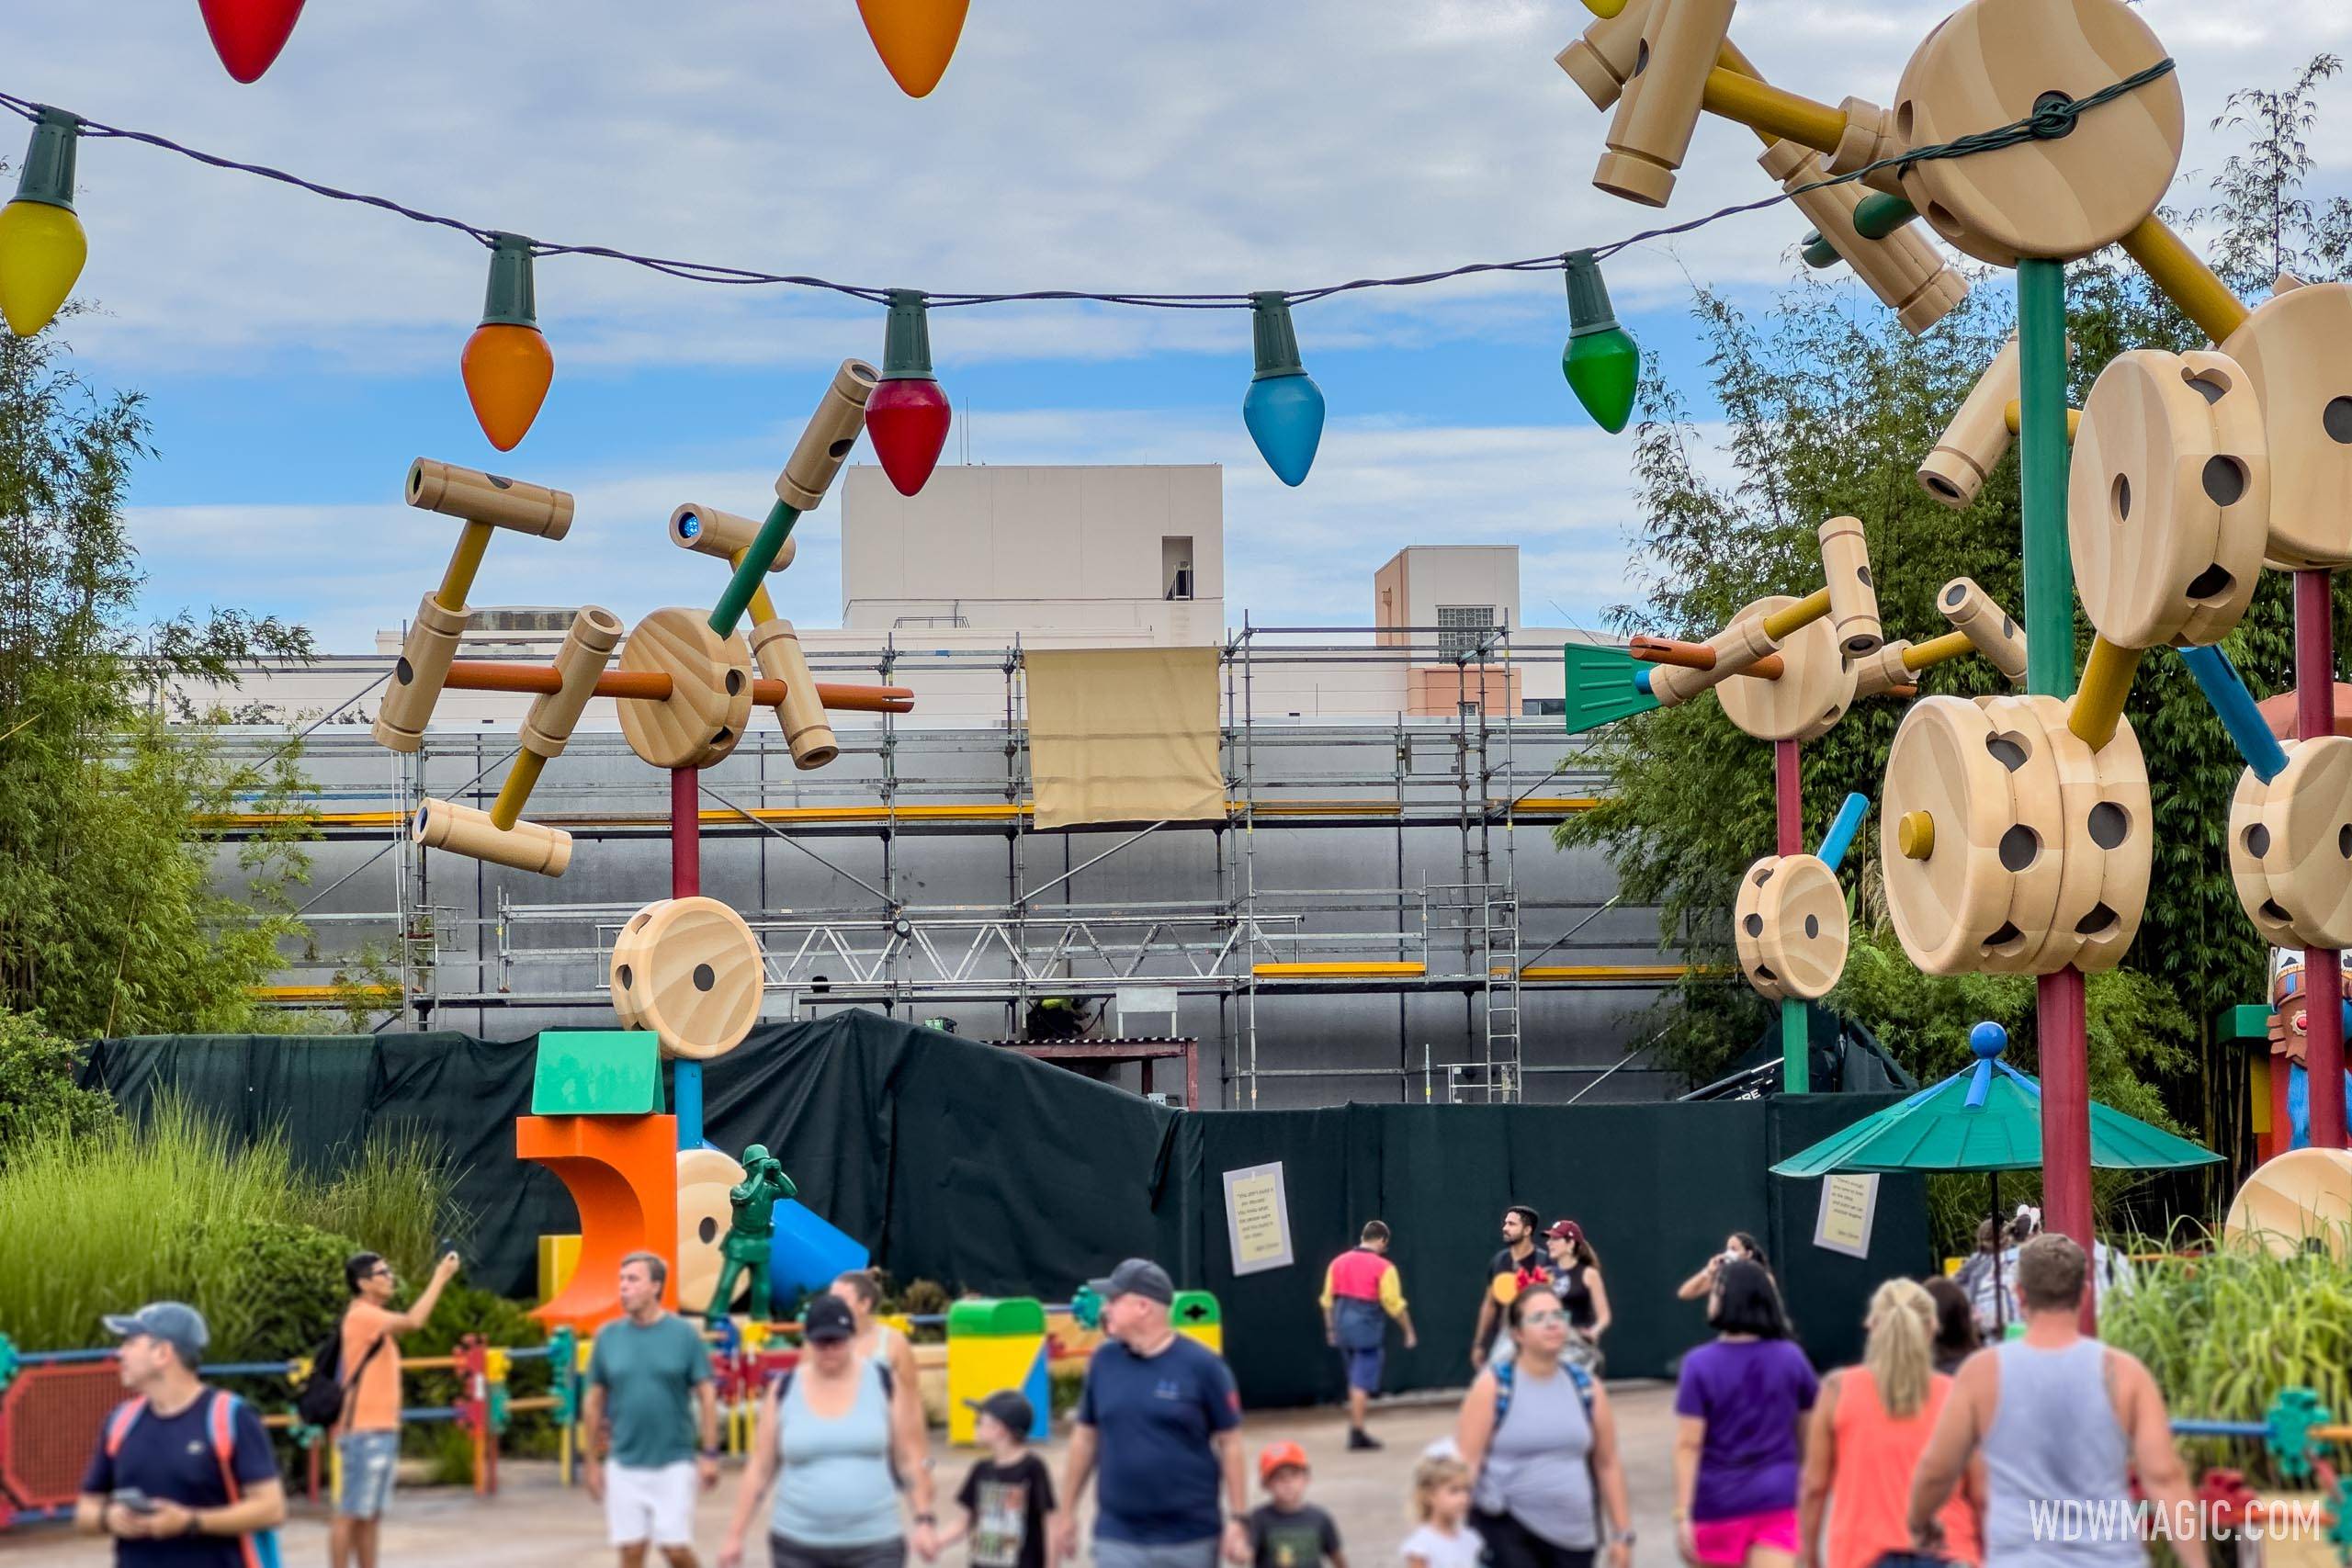 Signs of progress at Roundup Rodeo BBQ in Disney's Hollywood Studios